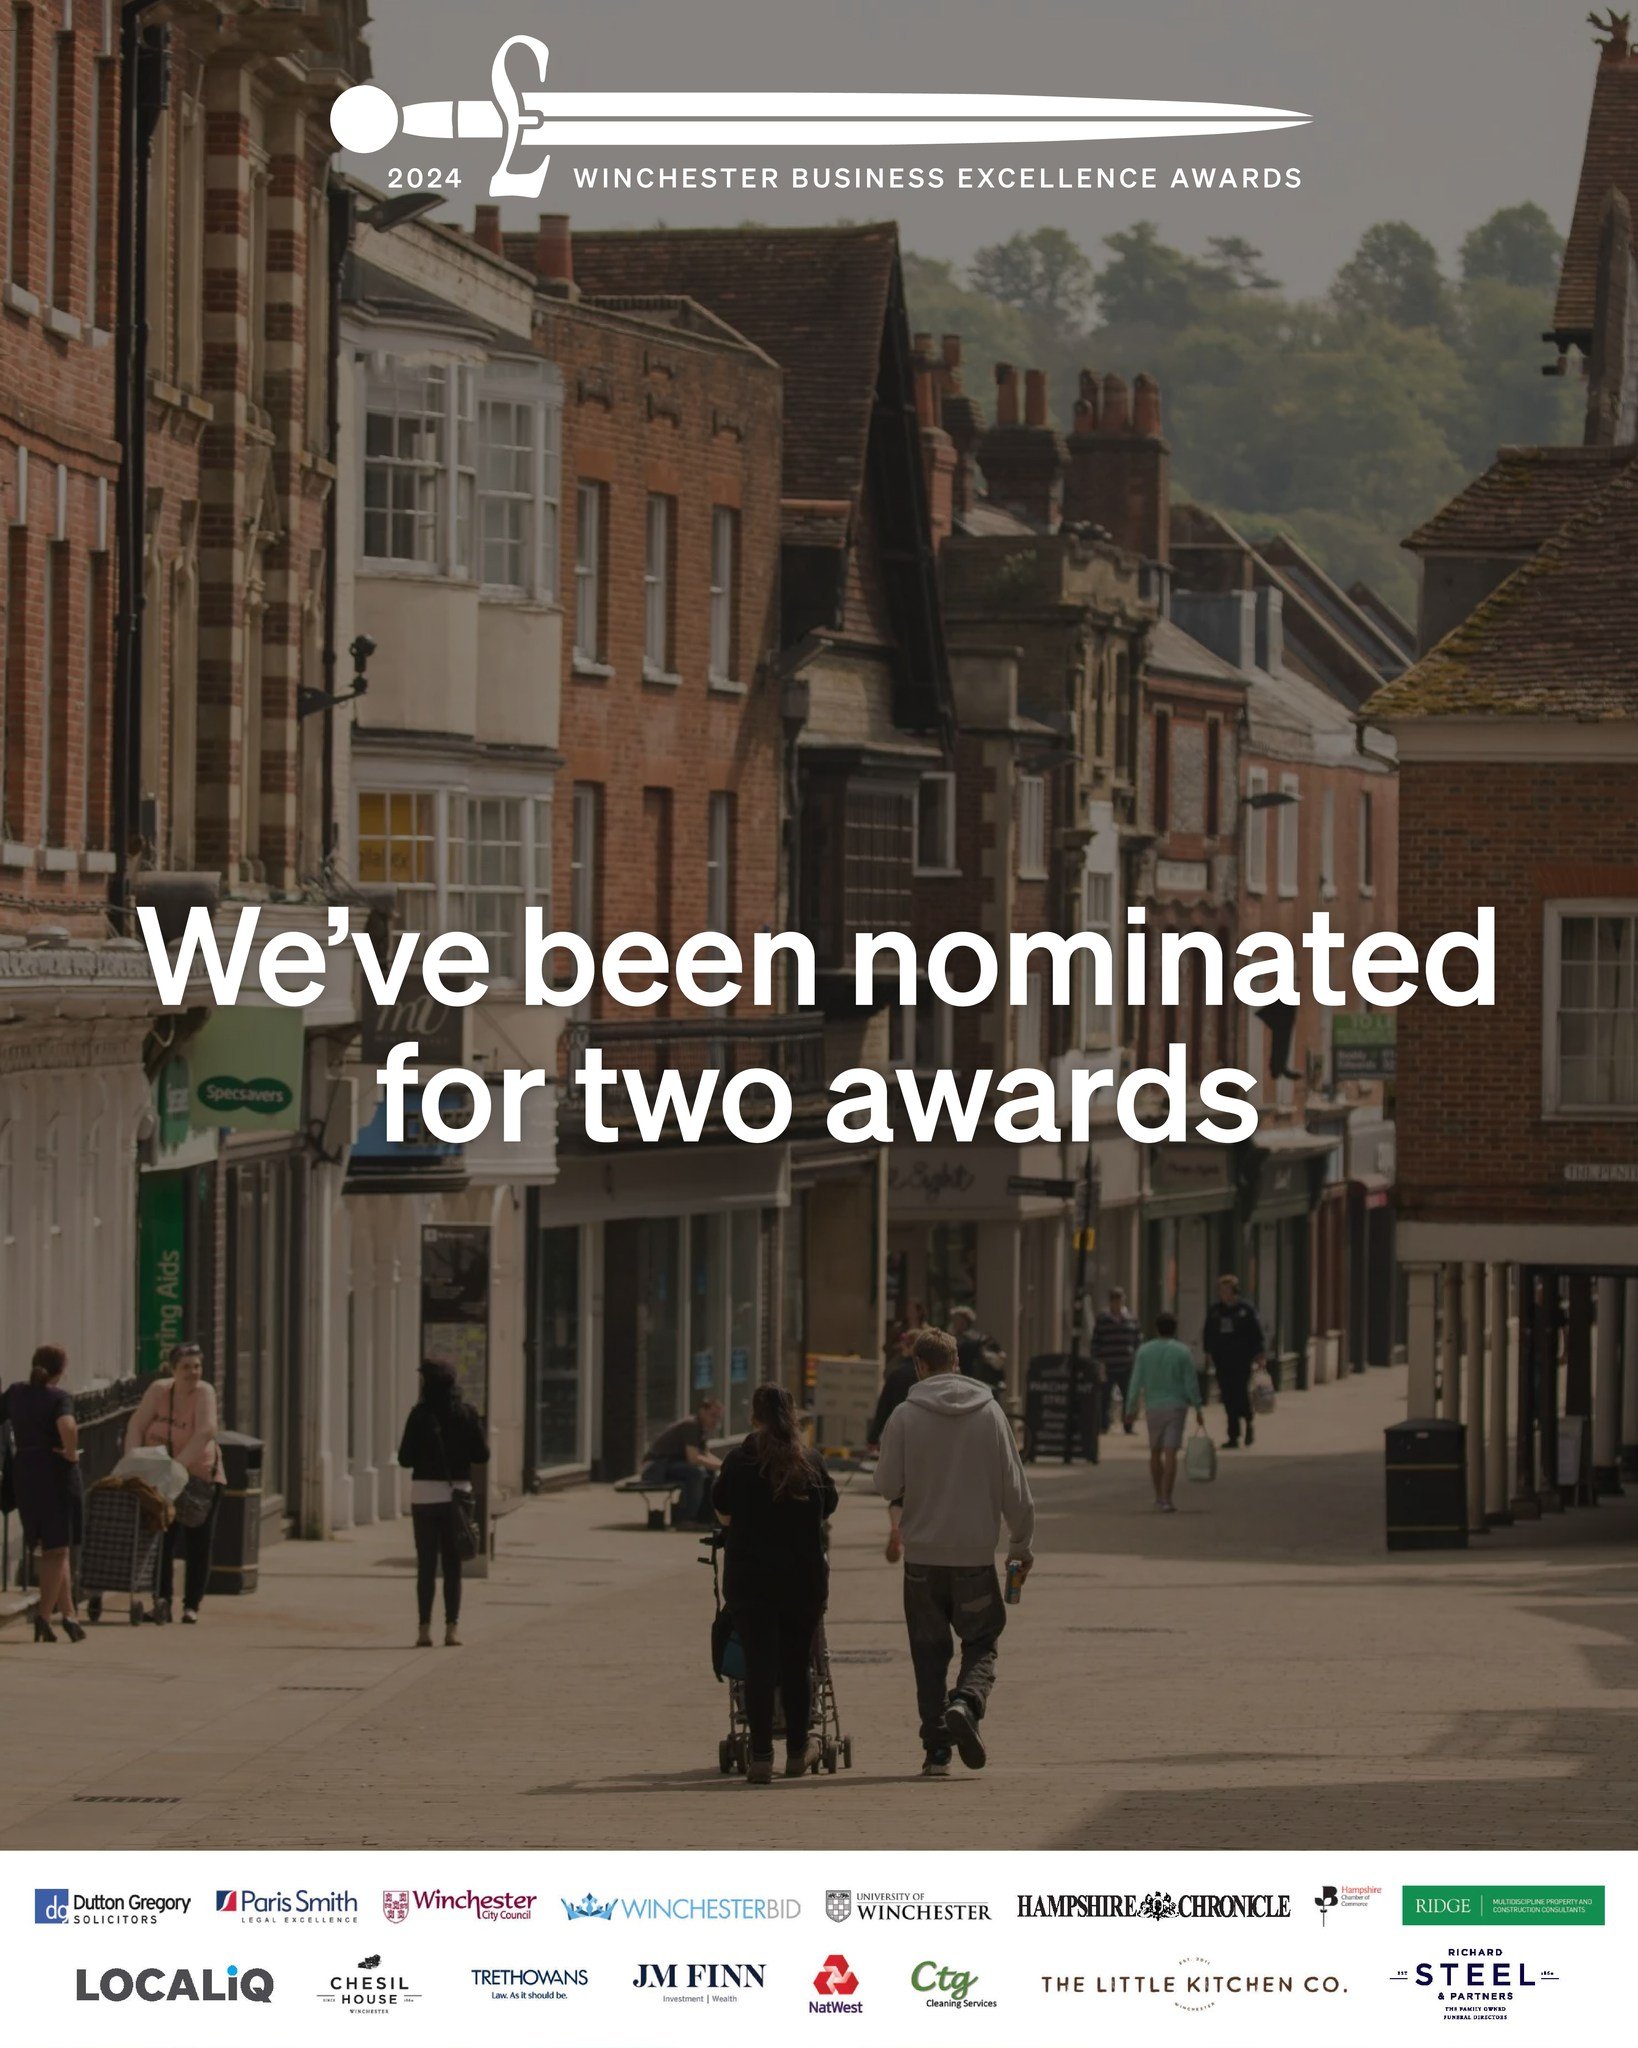 Our team work tirelessly to deliver the best service for our clients... which is why we are thrilled to have been nominated for the Winchester Business Excellence Awards in the following categories:

1️⃣ Service Excellence Award
2️⃣ SME/Independent B